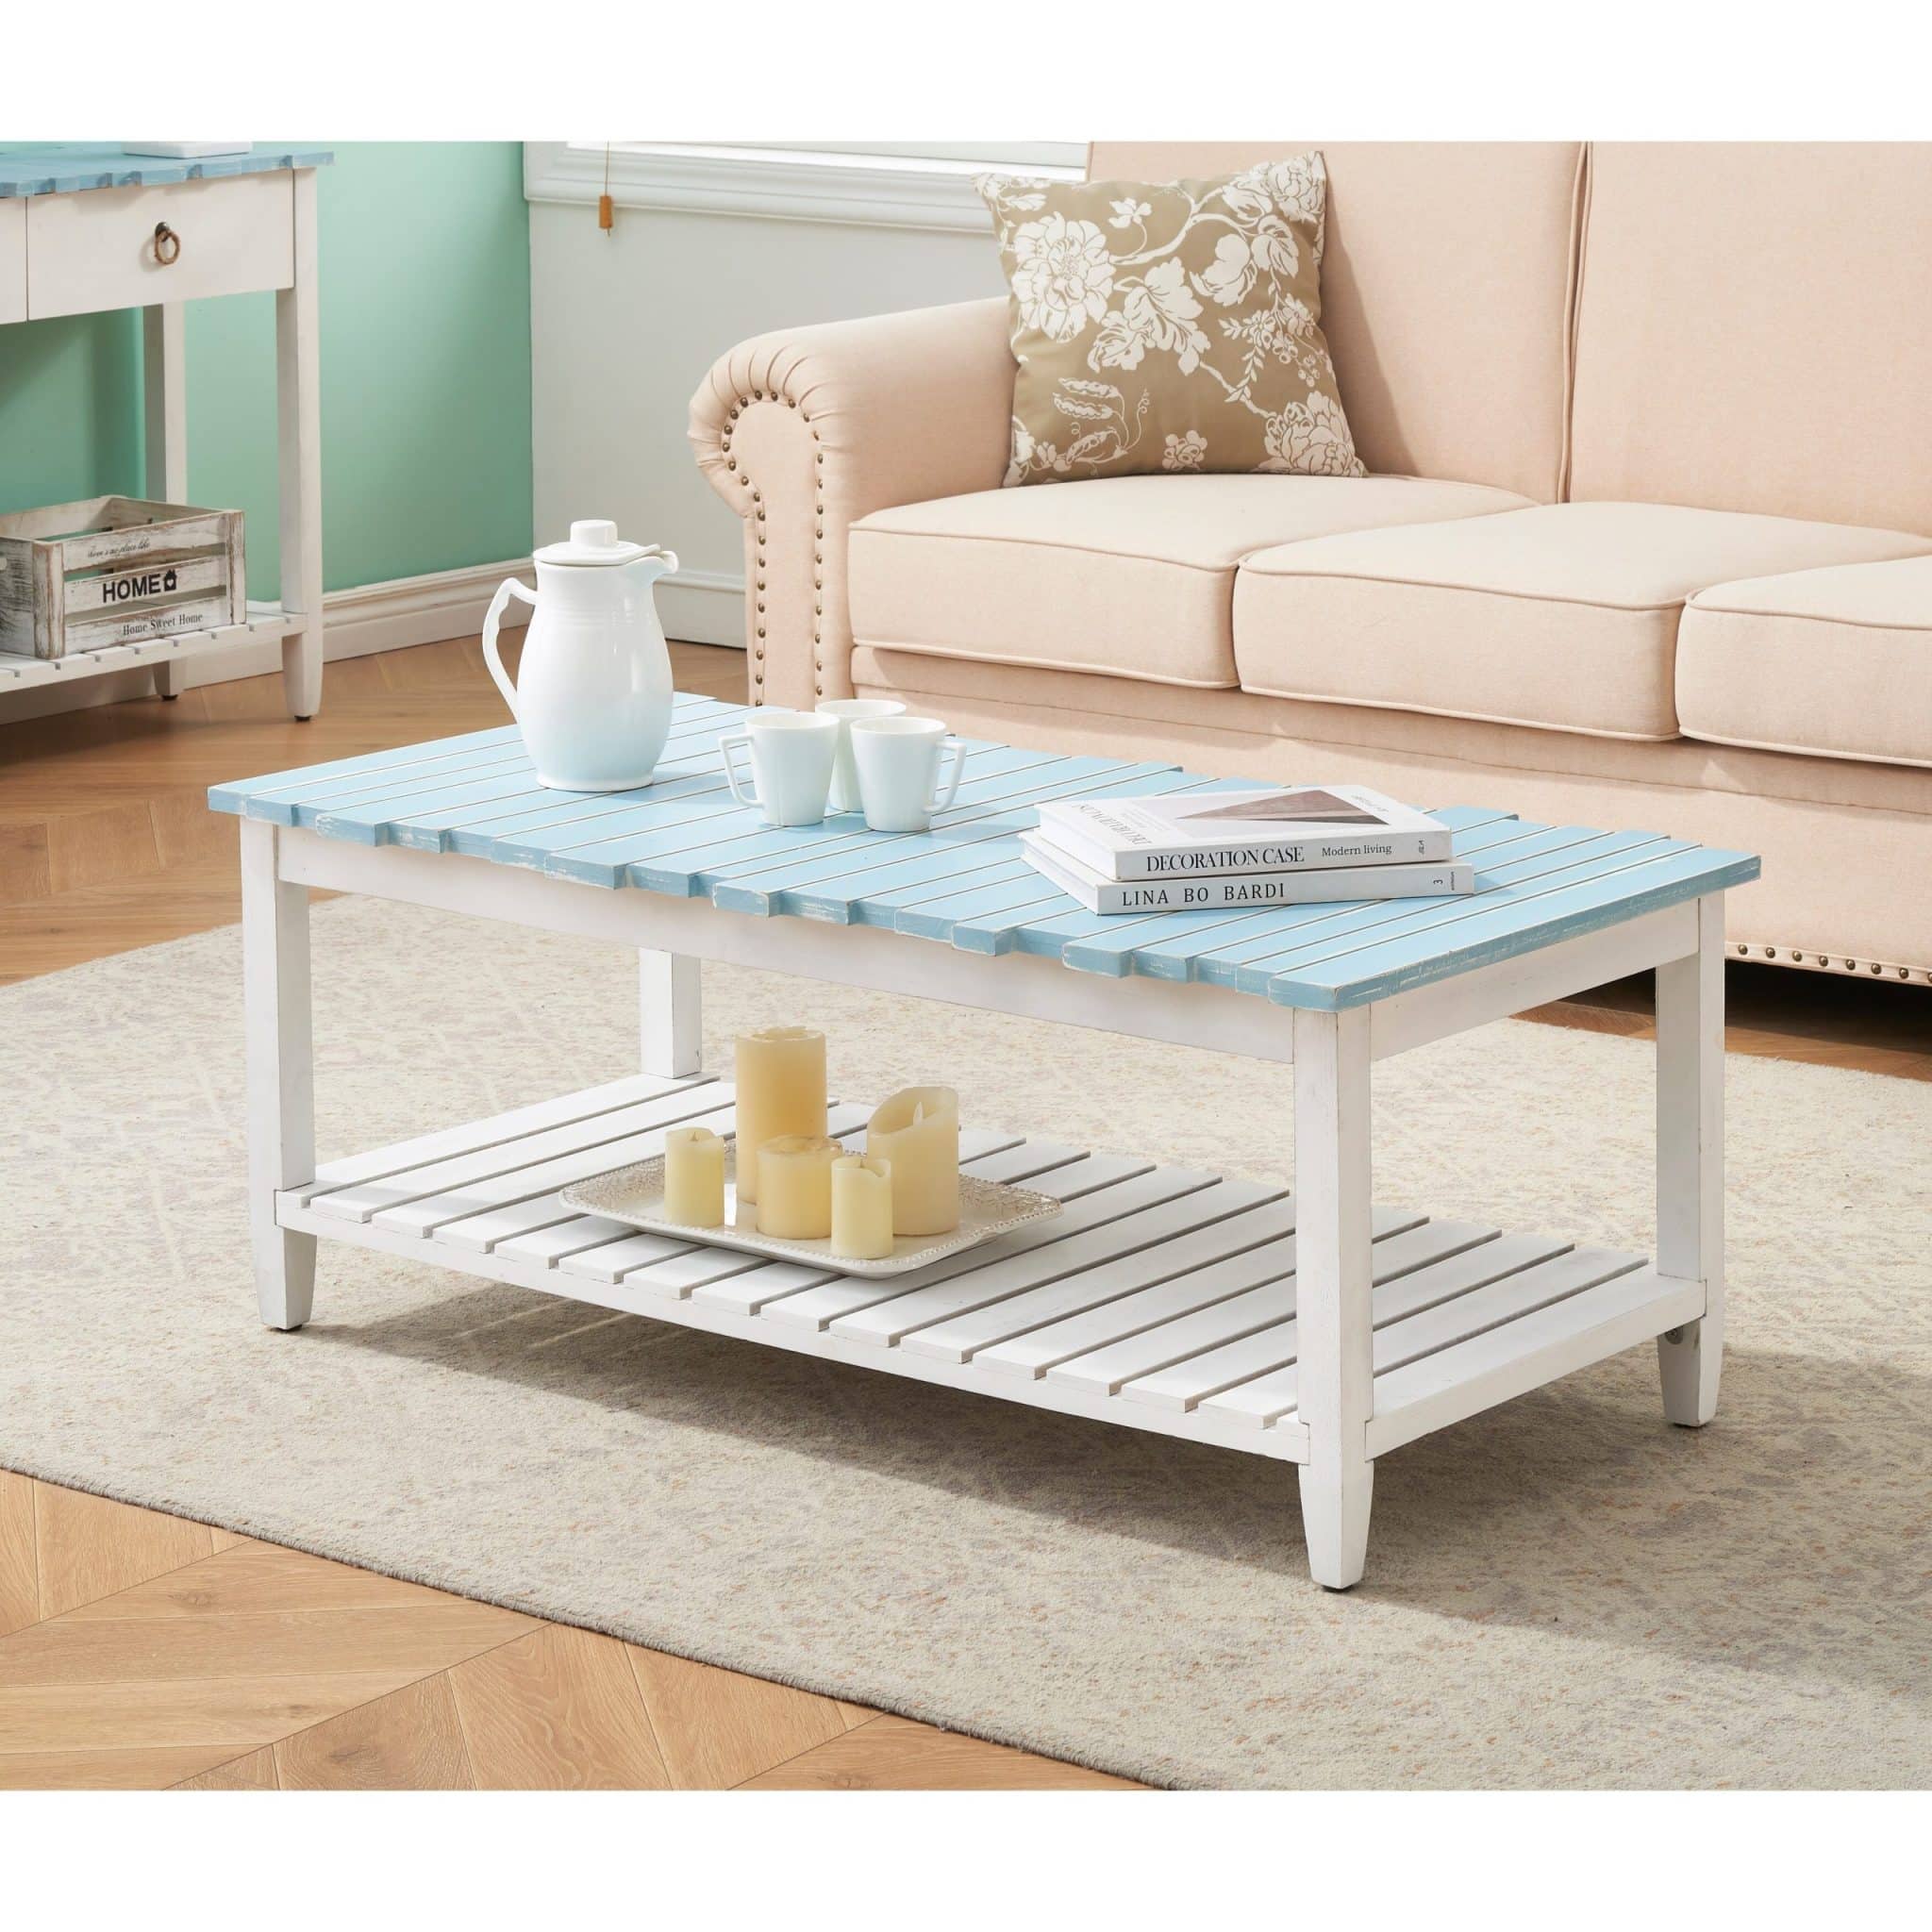 White and Teal coffee table